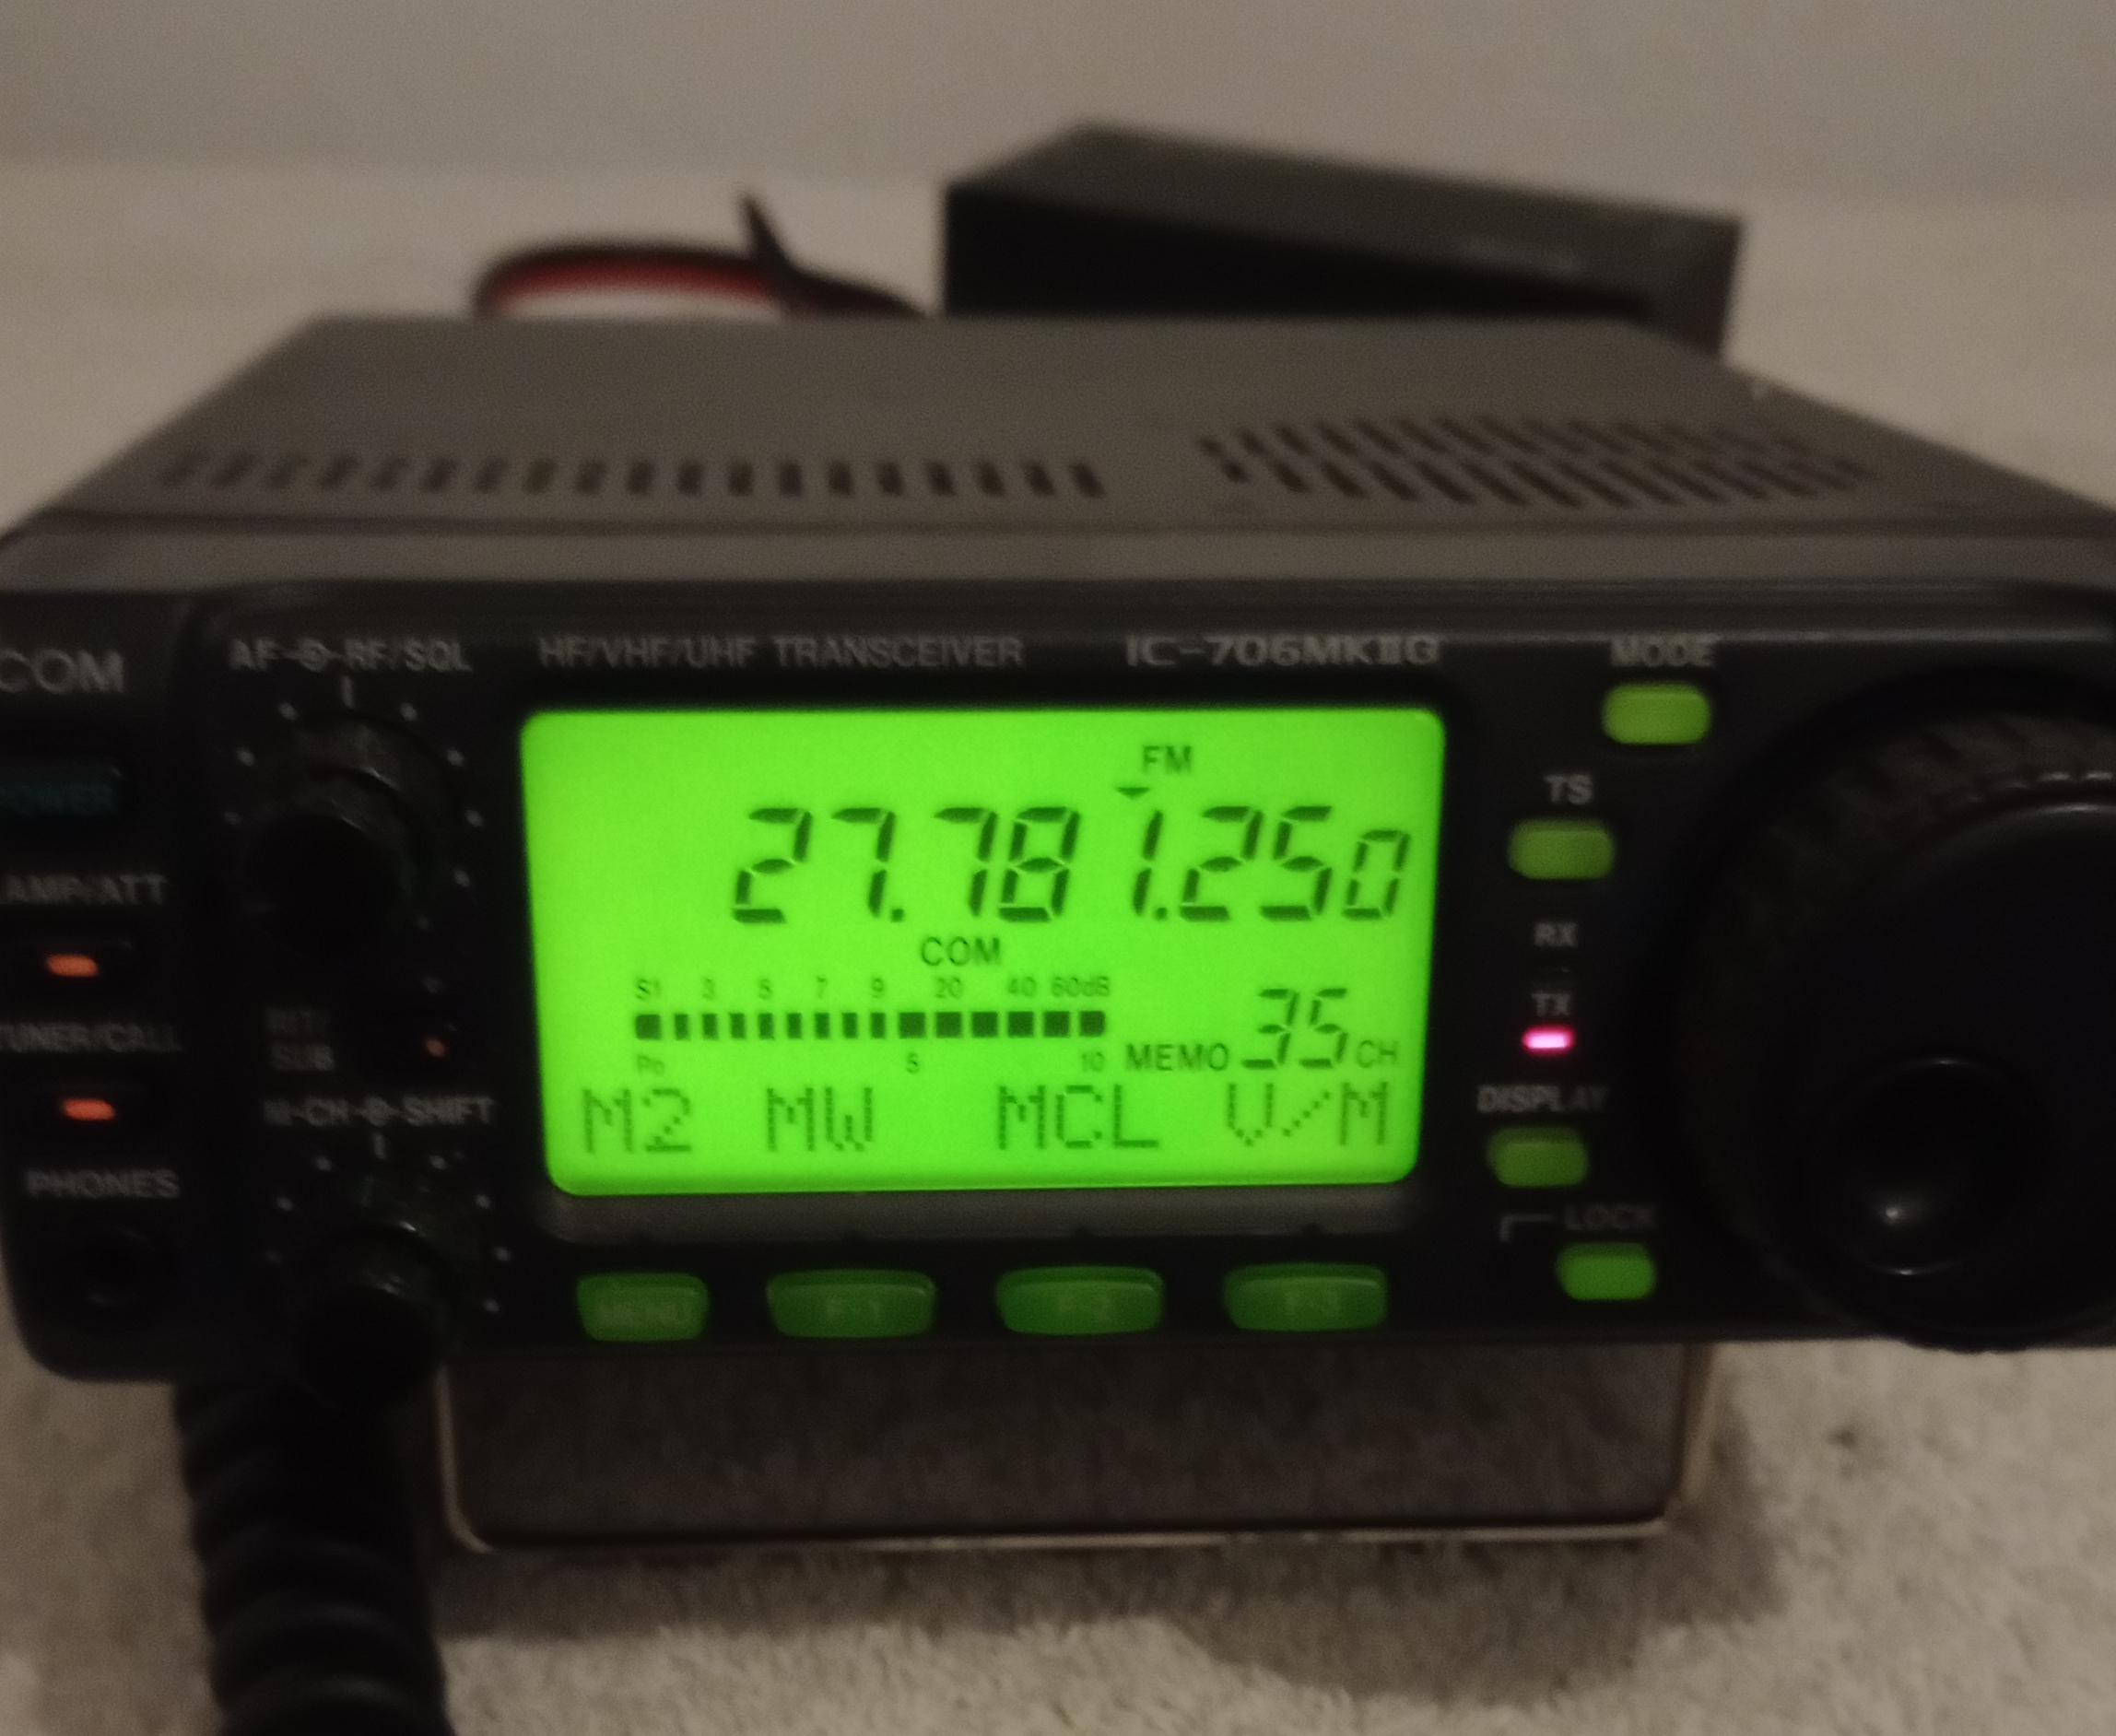 This radio has been wide-banded so will transmit on the 11 Meter Band.